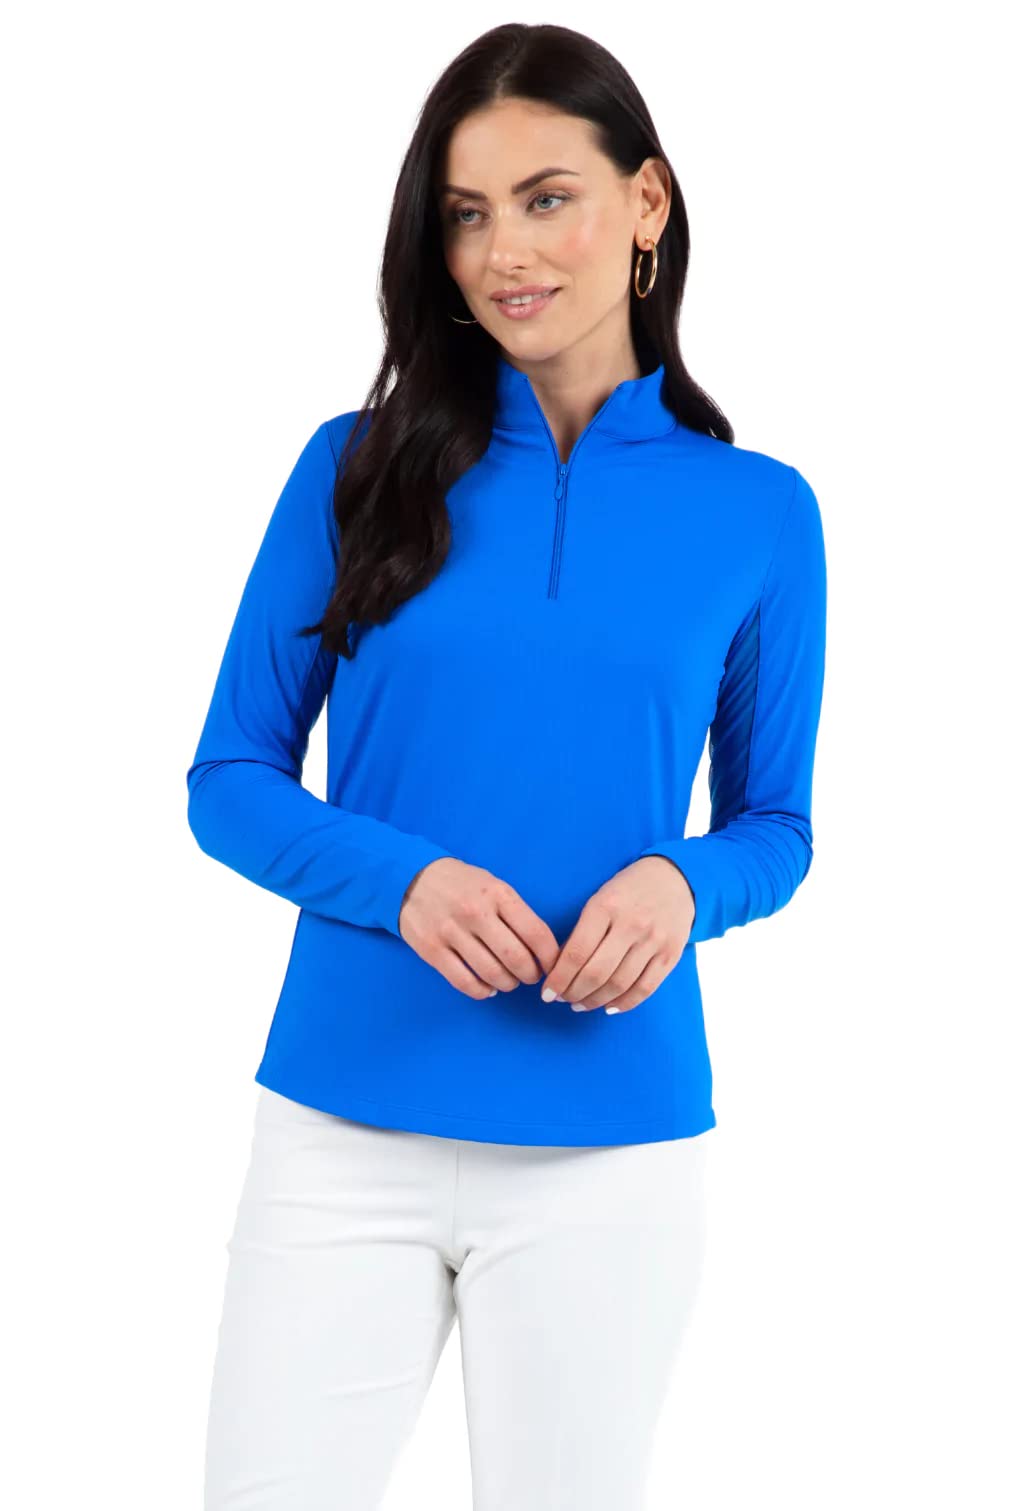 IBKUL Athleisure Wear Sun Protective UPF 50+ Icefil Cooling Tech Long Sleeve Mock Neck Top with Under Arm Mesh 80000 Blue Solid L